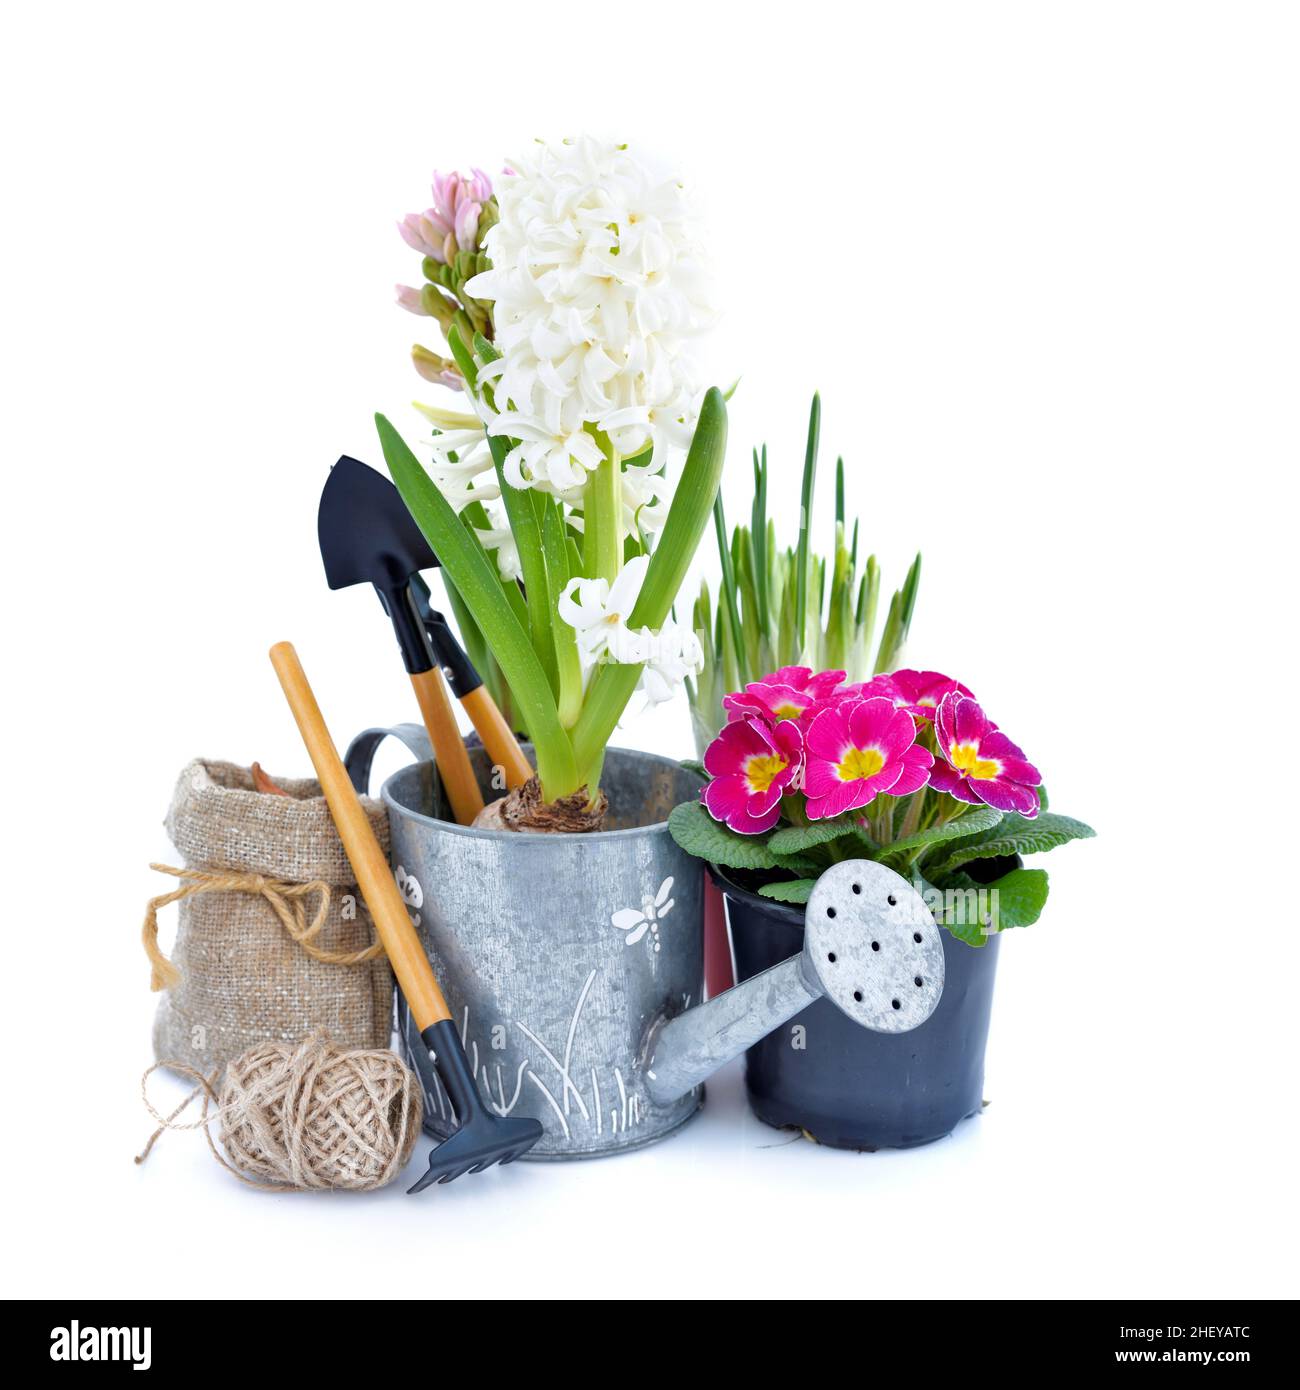 Spring hyacinth and primulas flowers, gardening tools on white background. Gardening concept Stock Photo